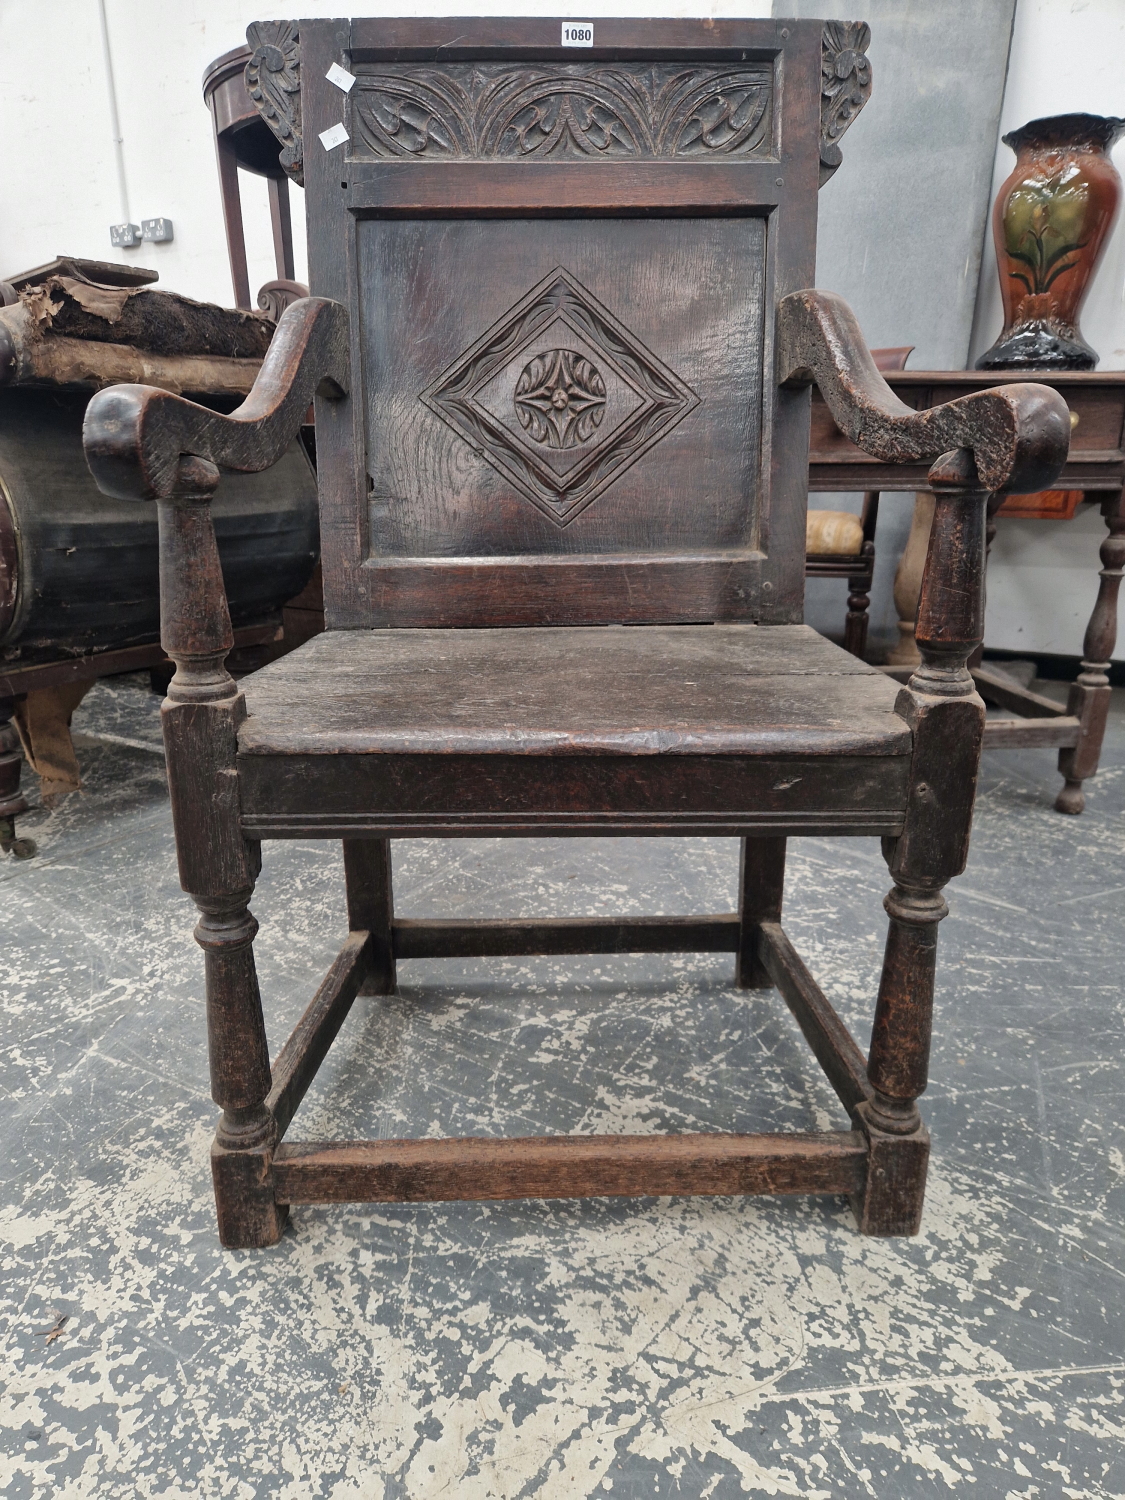 AN EARLY 18TH CENTURY WAINSCOTT CHAIR. - Image 5 of 6